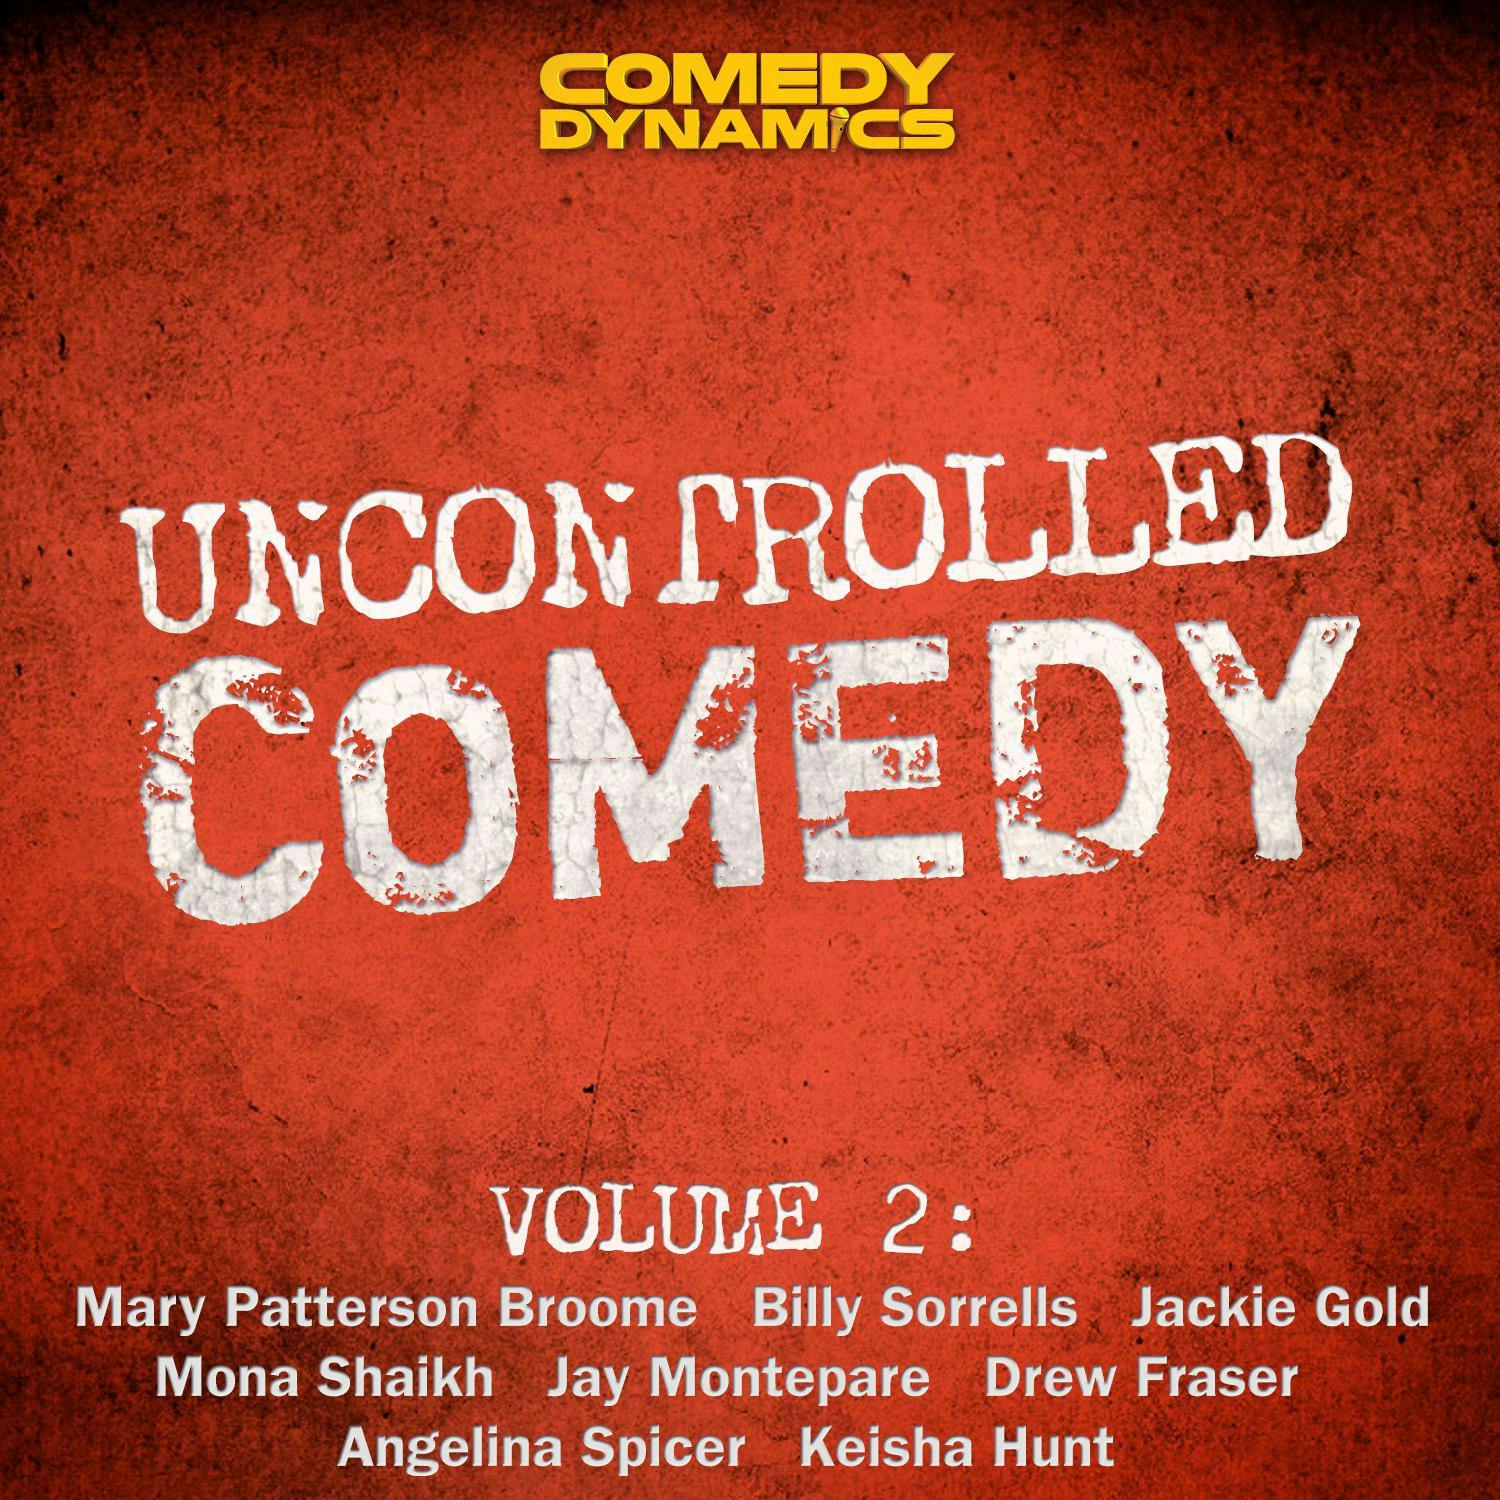 Uncontrolled Comedy, Volume 2 - Keisha Hunt, Jay Montepare, Angelina Spicer, Drew Fraser, Jackie Gold, Billy Sorrells, Mona Shaikh, Mary Patterson Broome